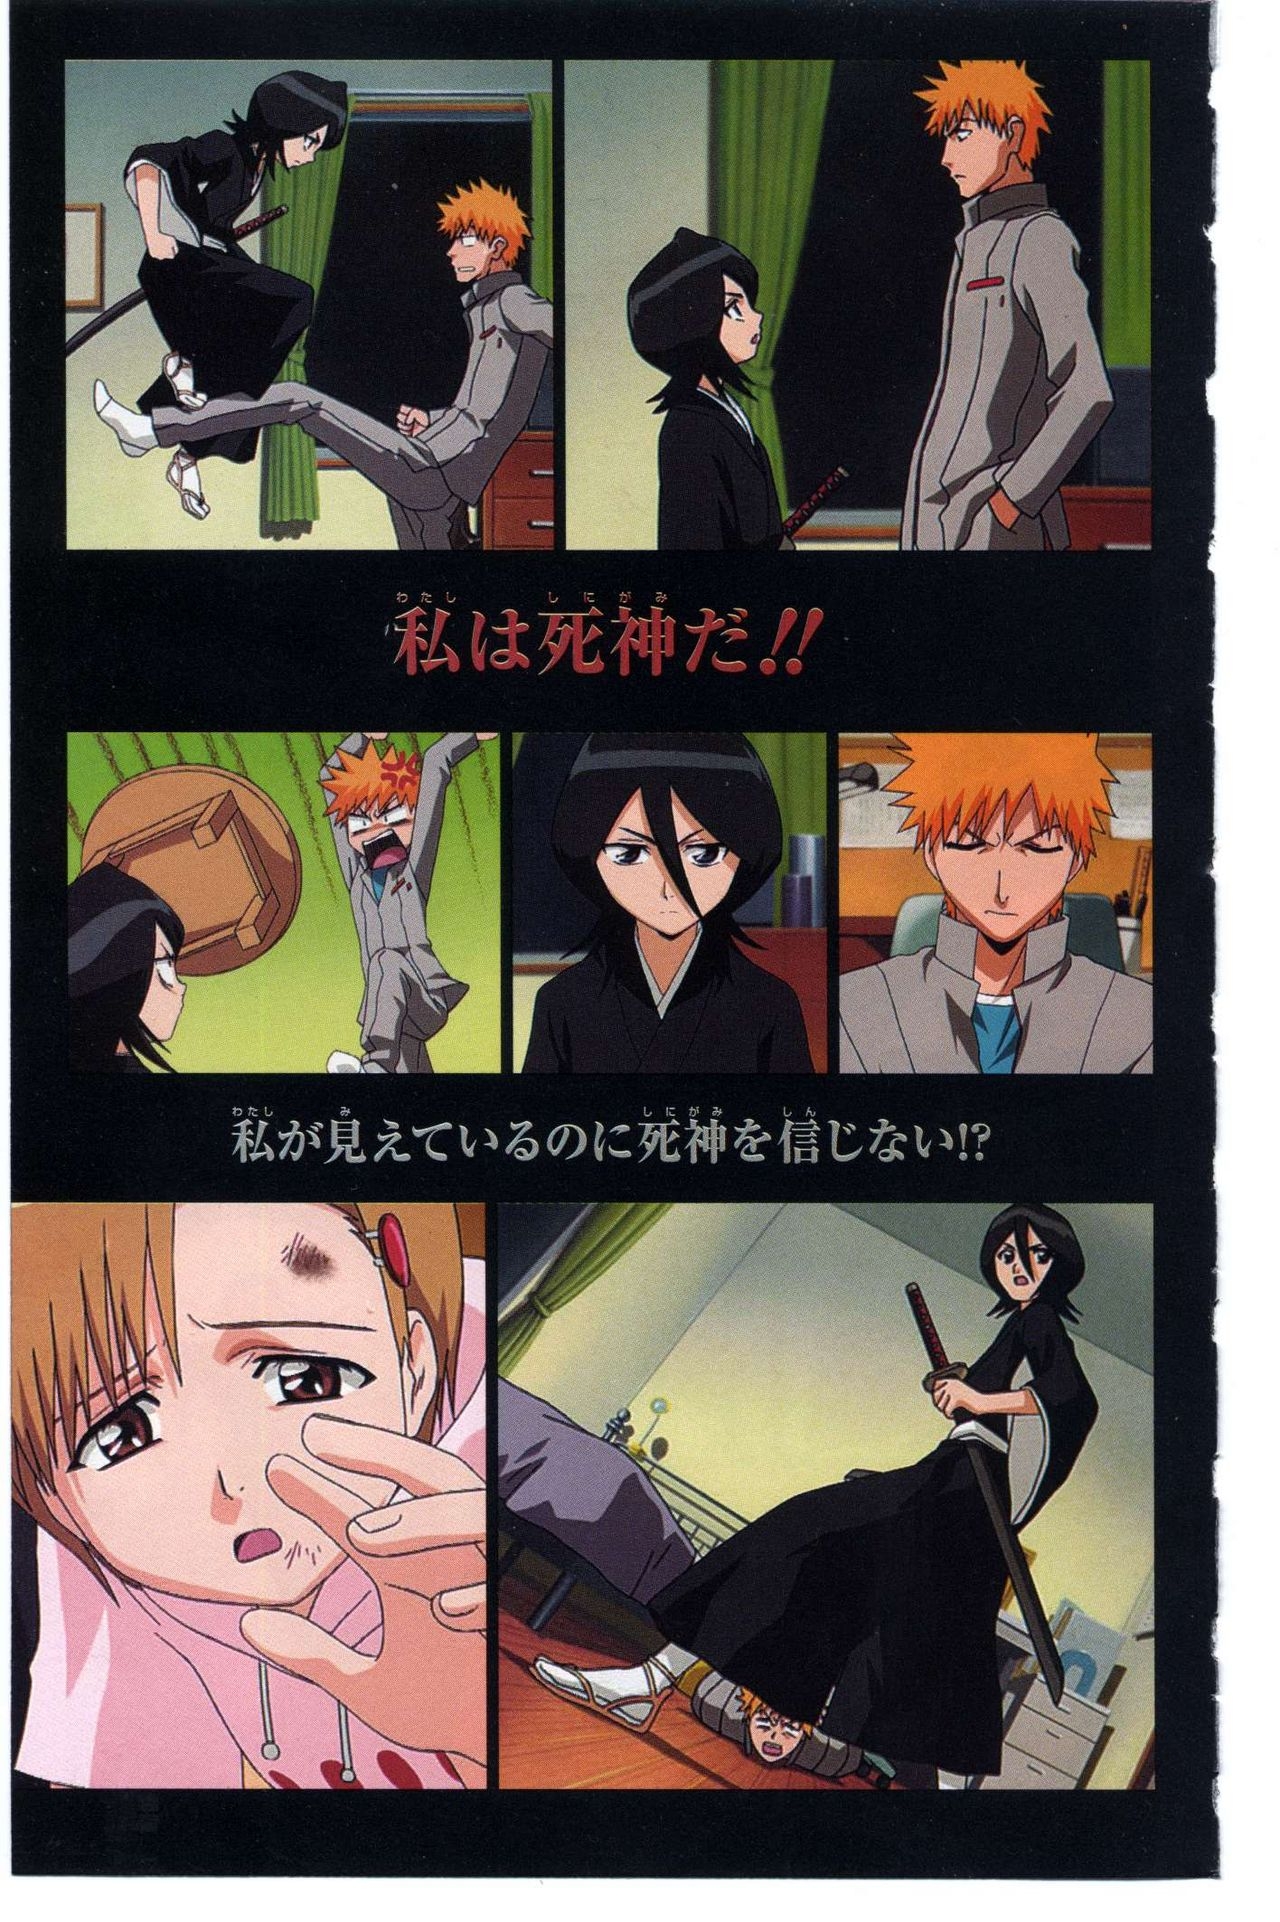 Bleach: Official Animation Book VIBEs 11